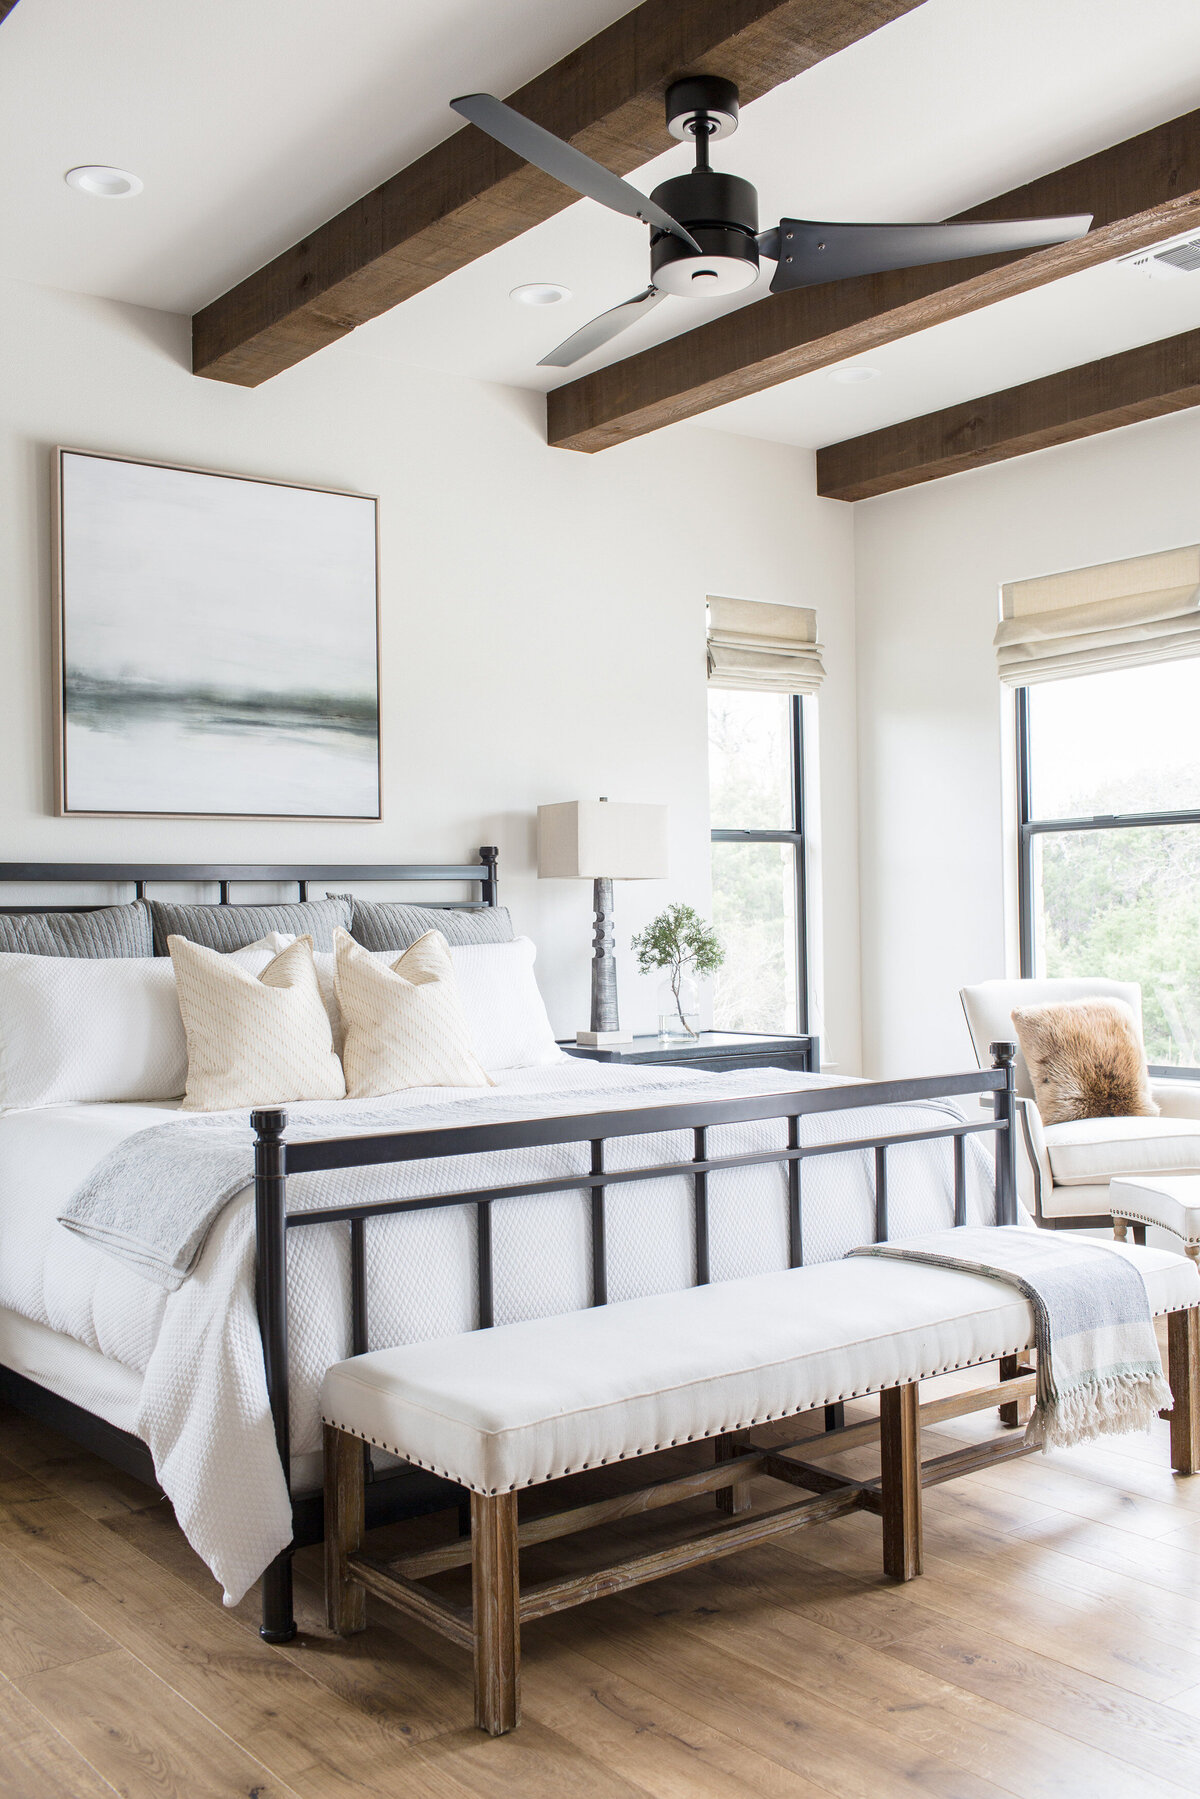 modern ranch style bedroom with wood beams on ceiling